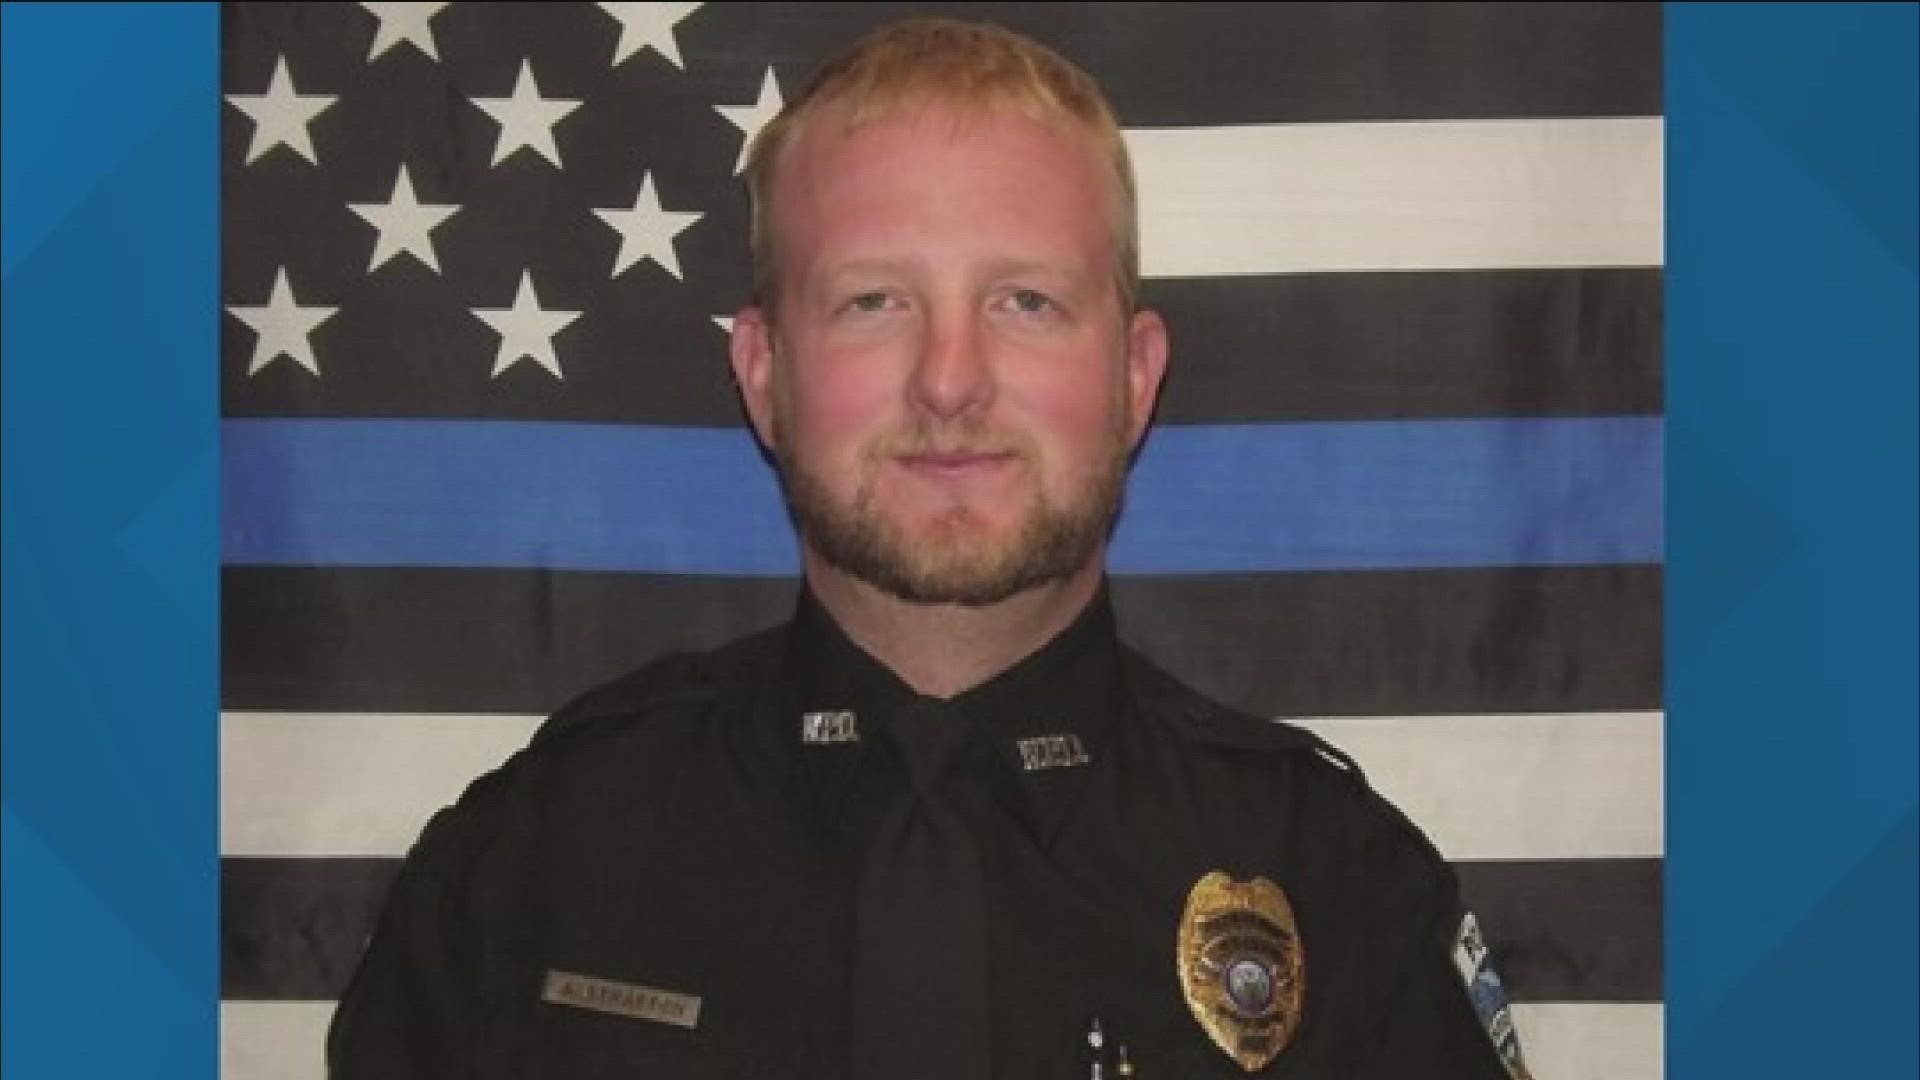 Officer Austin Stratton was able to revive the baby and rush the child to an ambulance as it arrived.